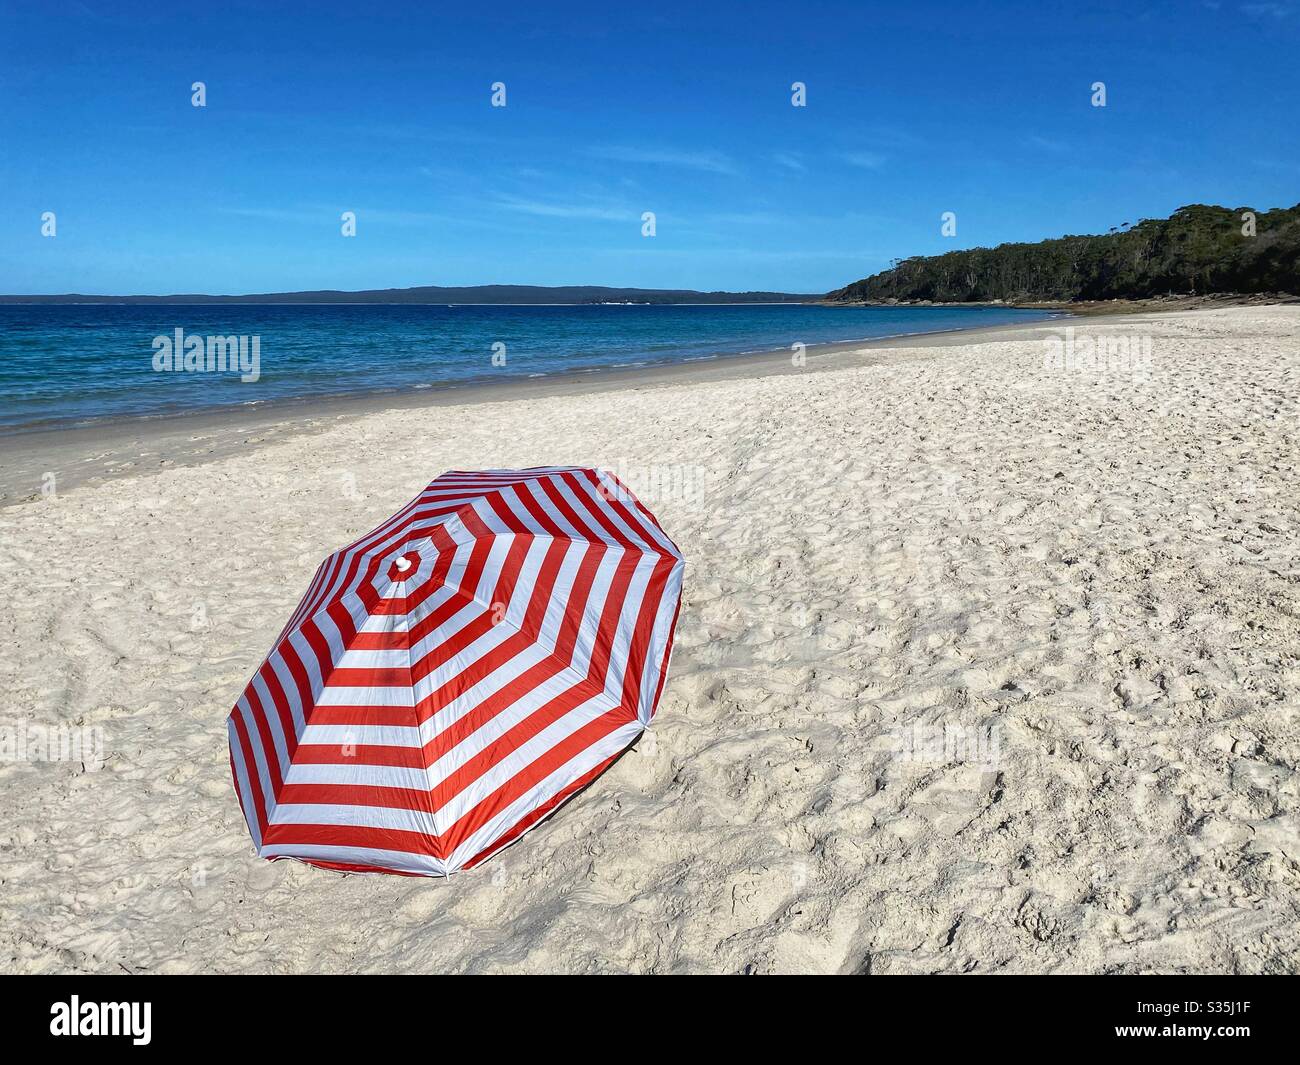 Beach umbrella on deserted white sandy beach. Concept - umbrella on empty beach awaits return of people after end of social distancing and self isolation caused by Coronavirus (return to normal life) Stock Photo